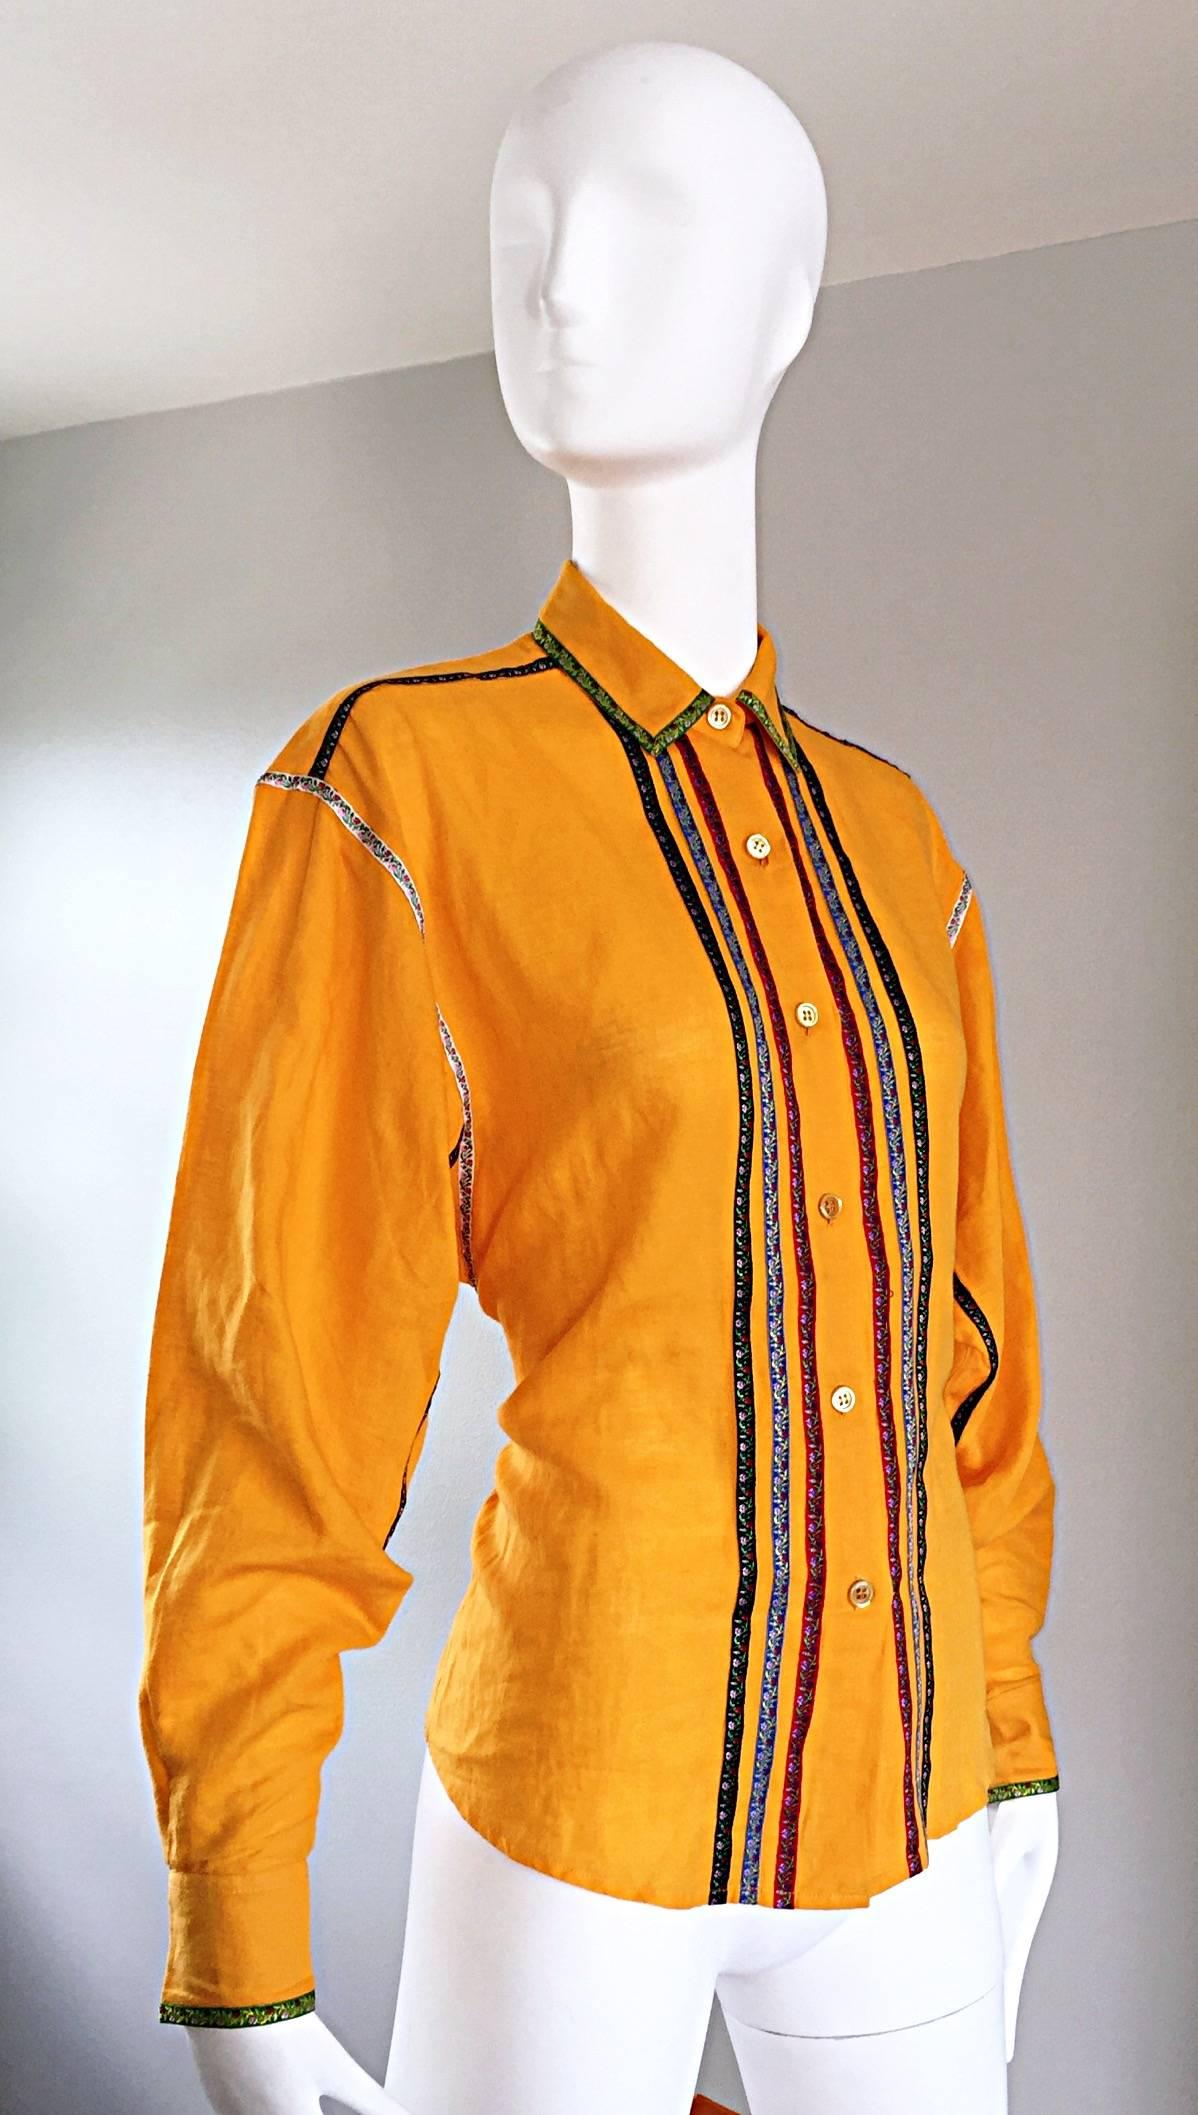 Vintage Kenzo 1990s Marigold Yellow German Inspired Linen + Cotton Blouse Top In Excellent Condition For Sale In San Diego, CA